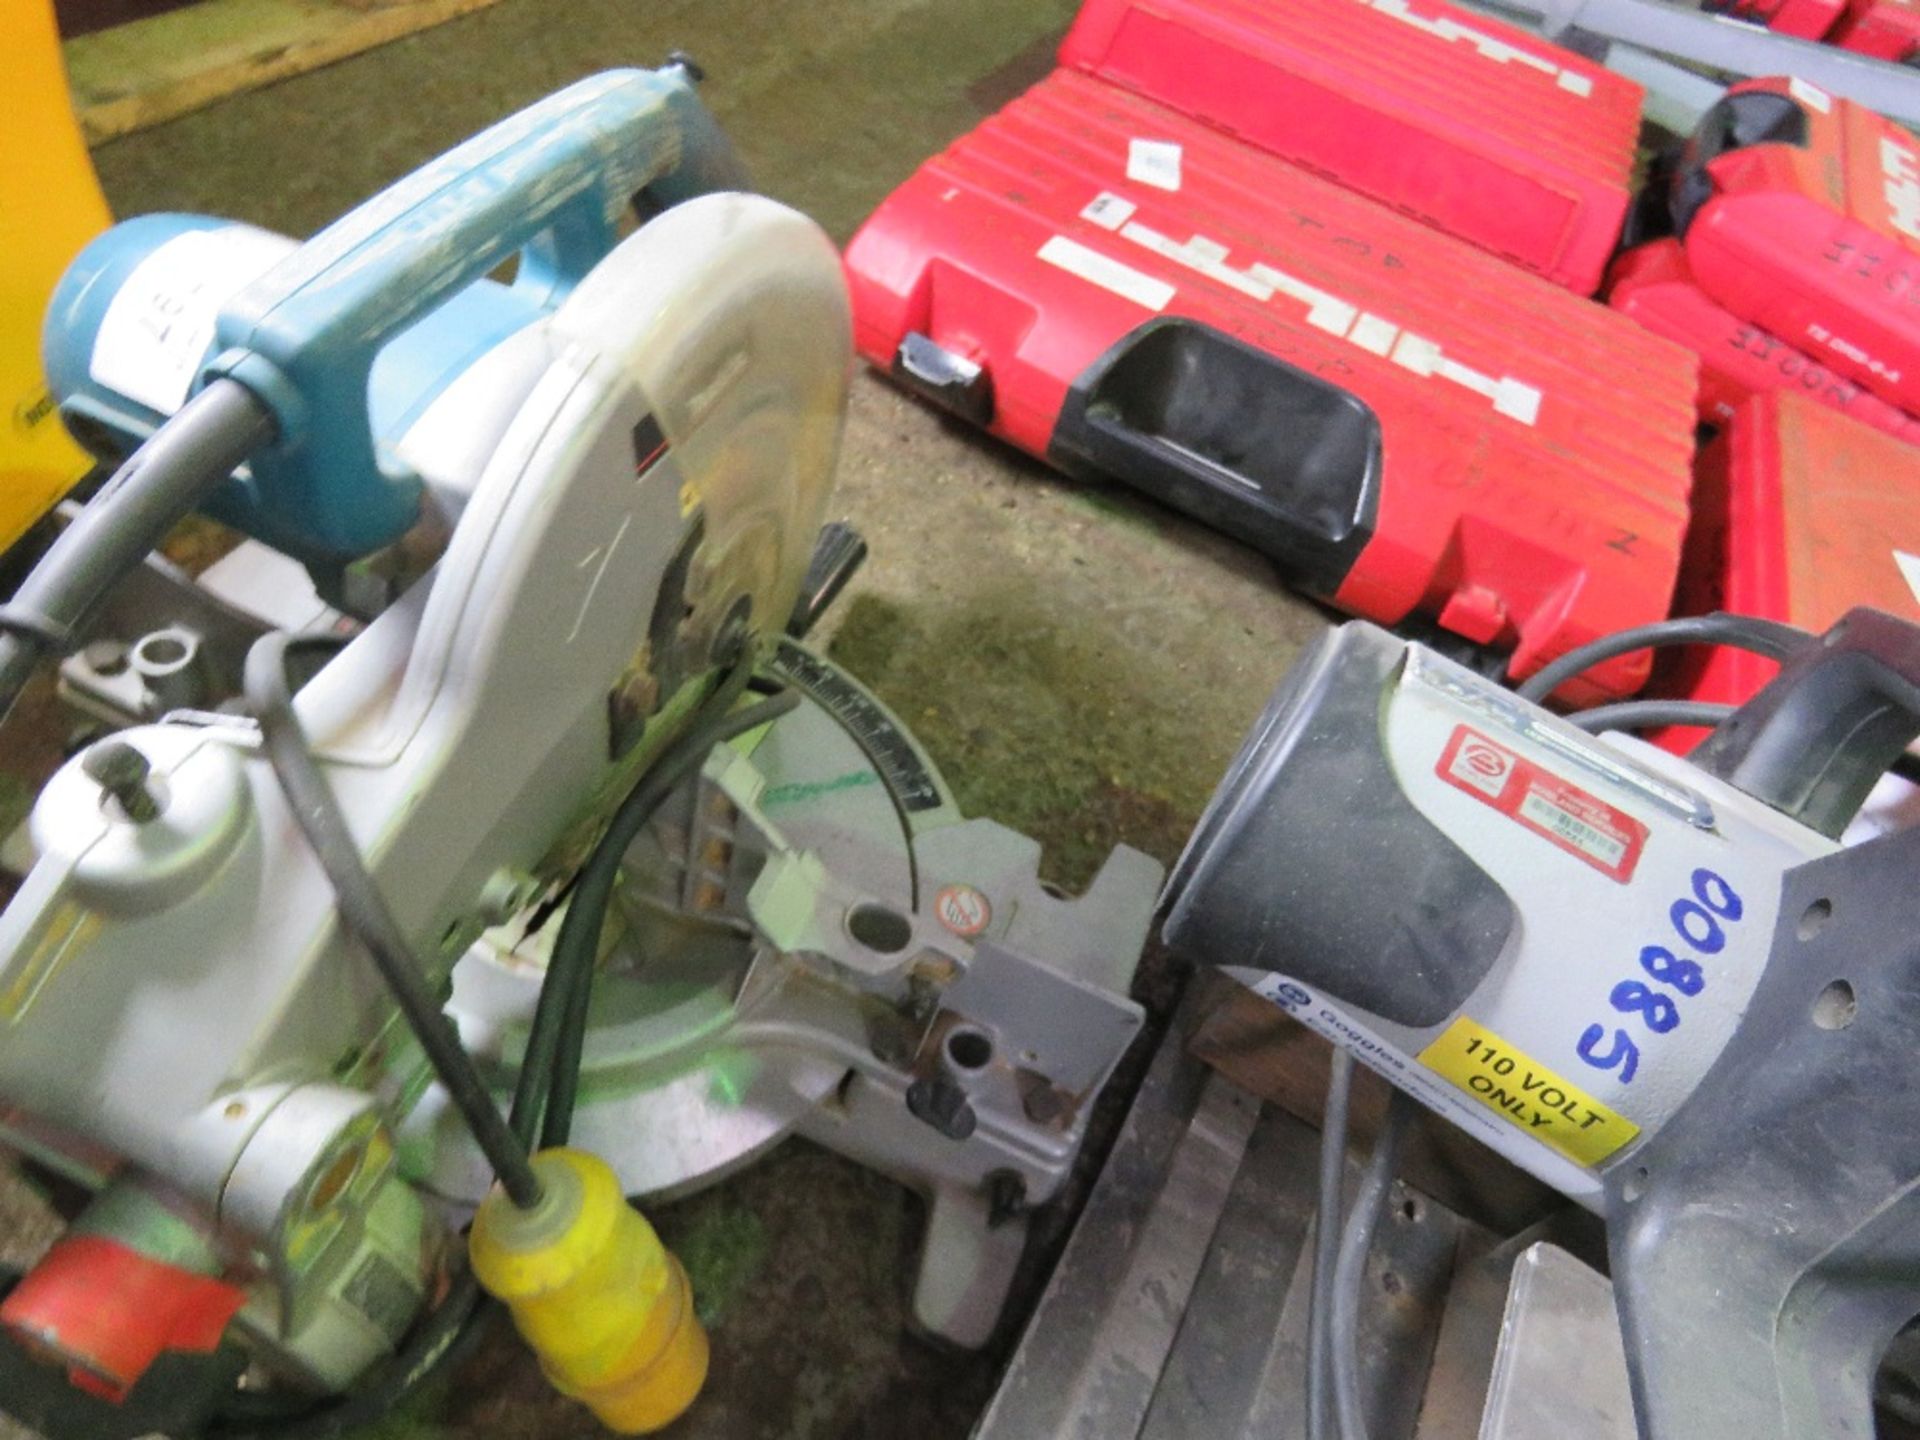 MAKITA CROSS CUT MITRE SAW 110 VOLT POWERED. SOURCED FROM DEPOT CLEARANCE DUE TO A CHANGE IN COMPANY - Image 2 of 3